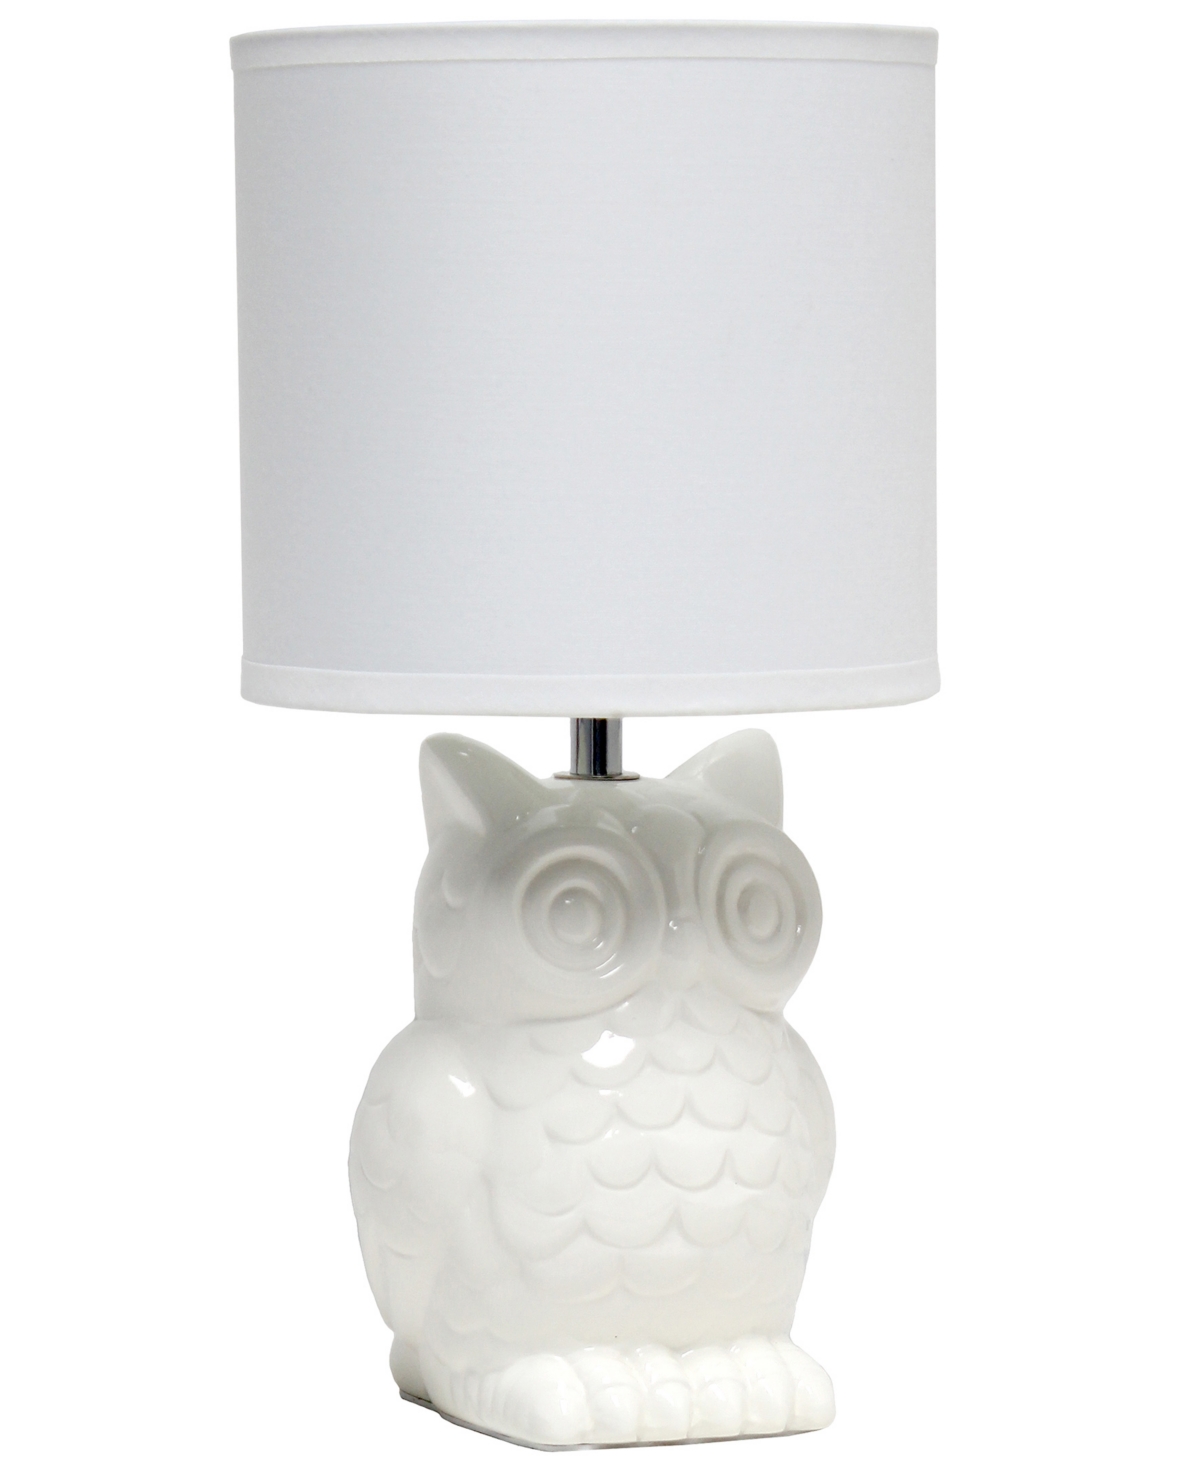 Shop Simple Designs 12.8" Tall Contemporary Ceramic Owl Bedside Table Desk Lamp With Matching Fabric Shade In Off White